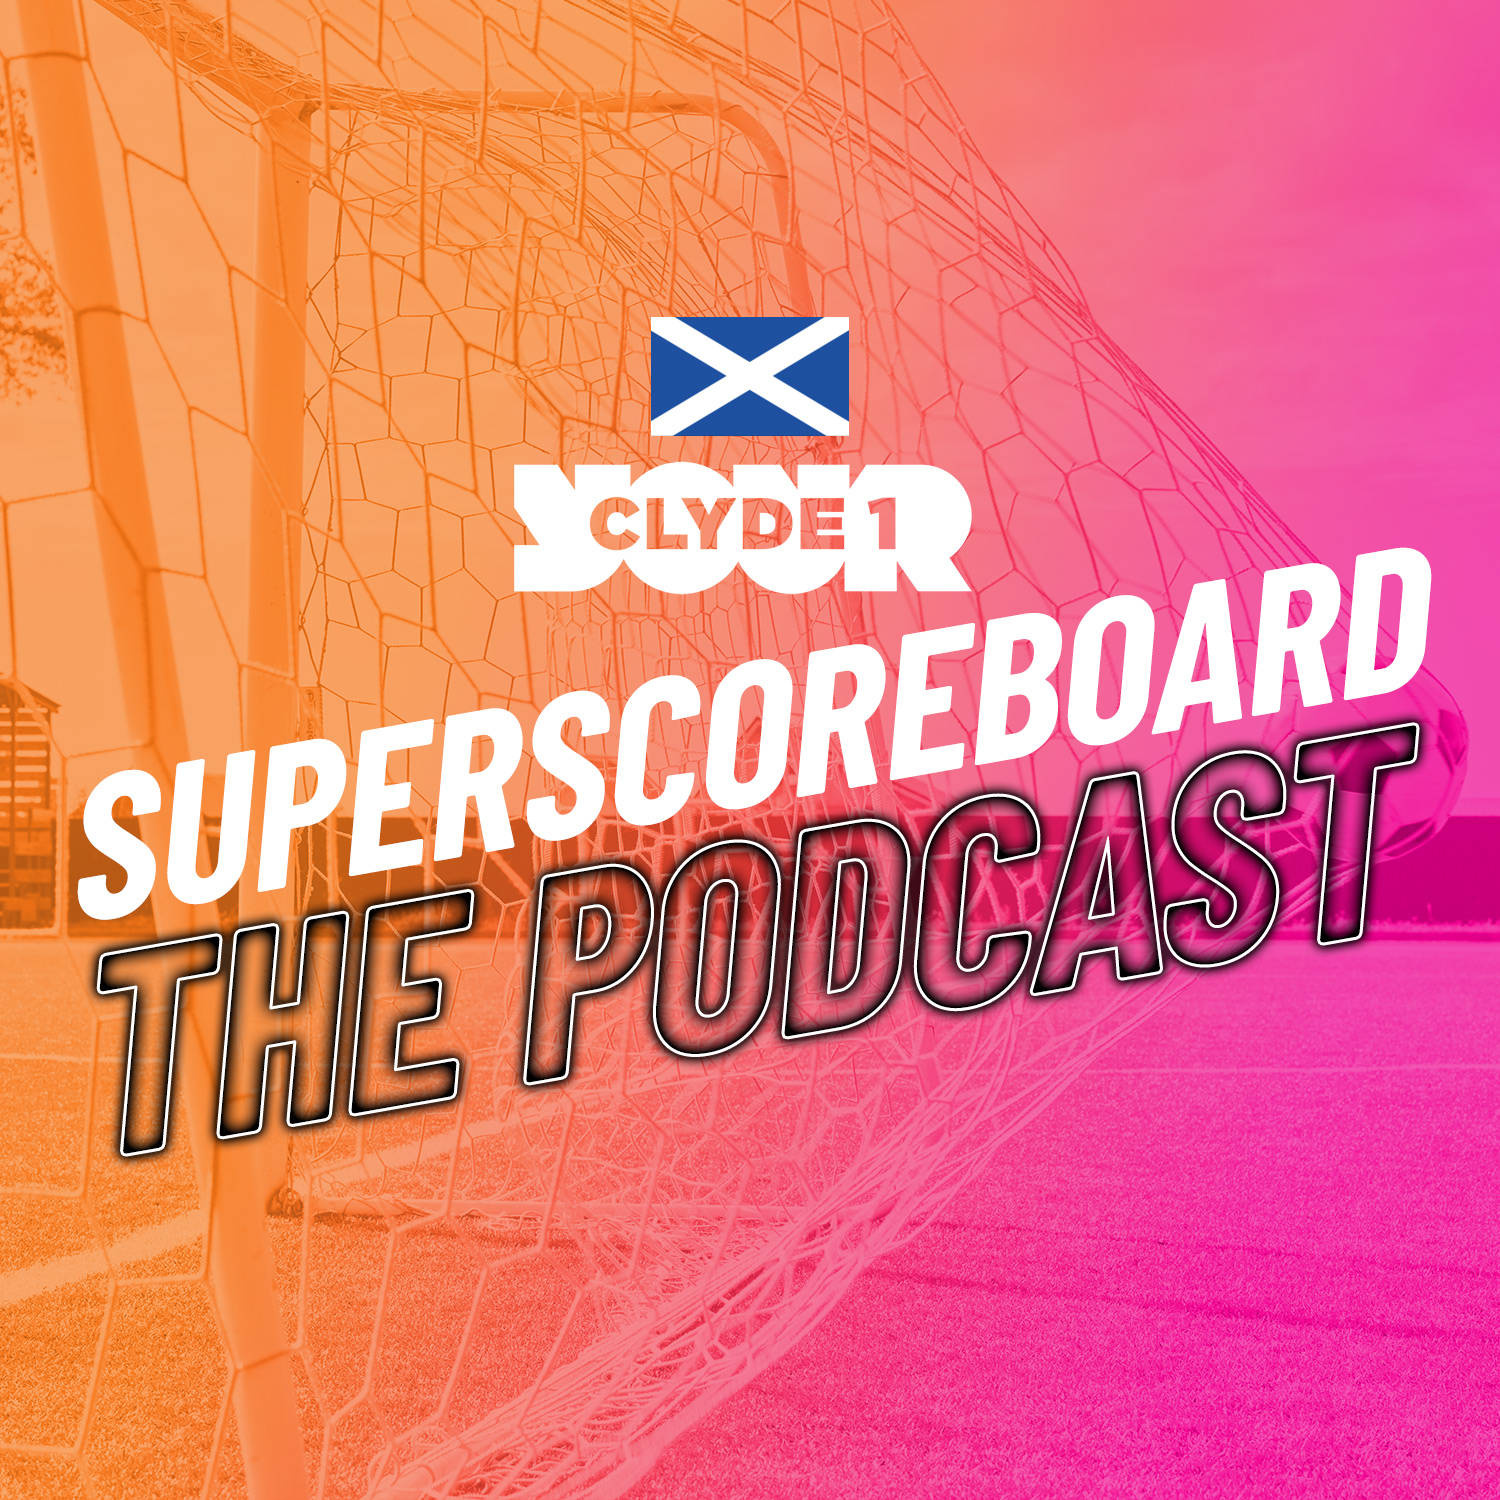 Thursday 25th January Clyde 1 Superscoreboard